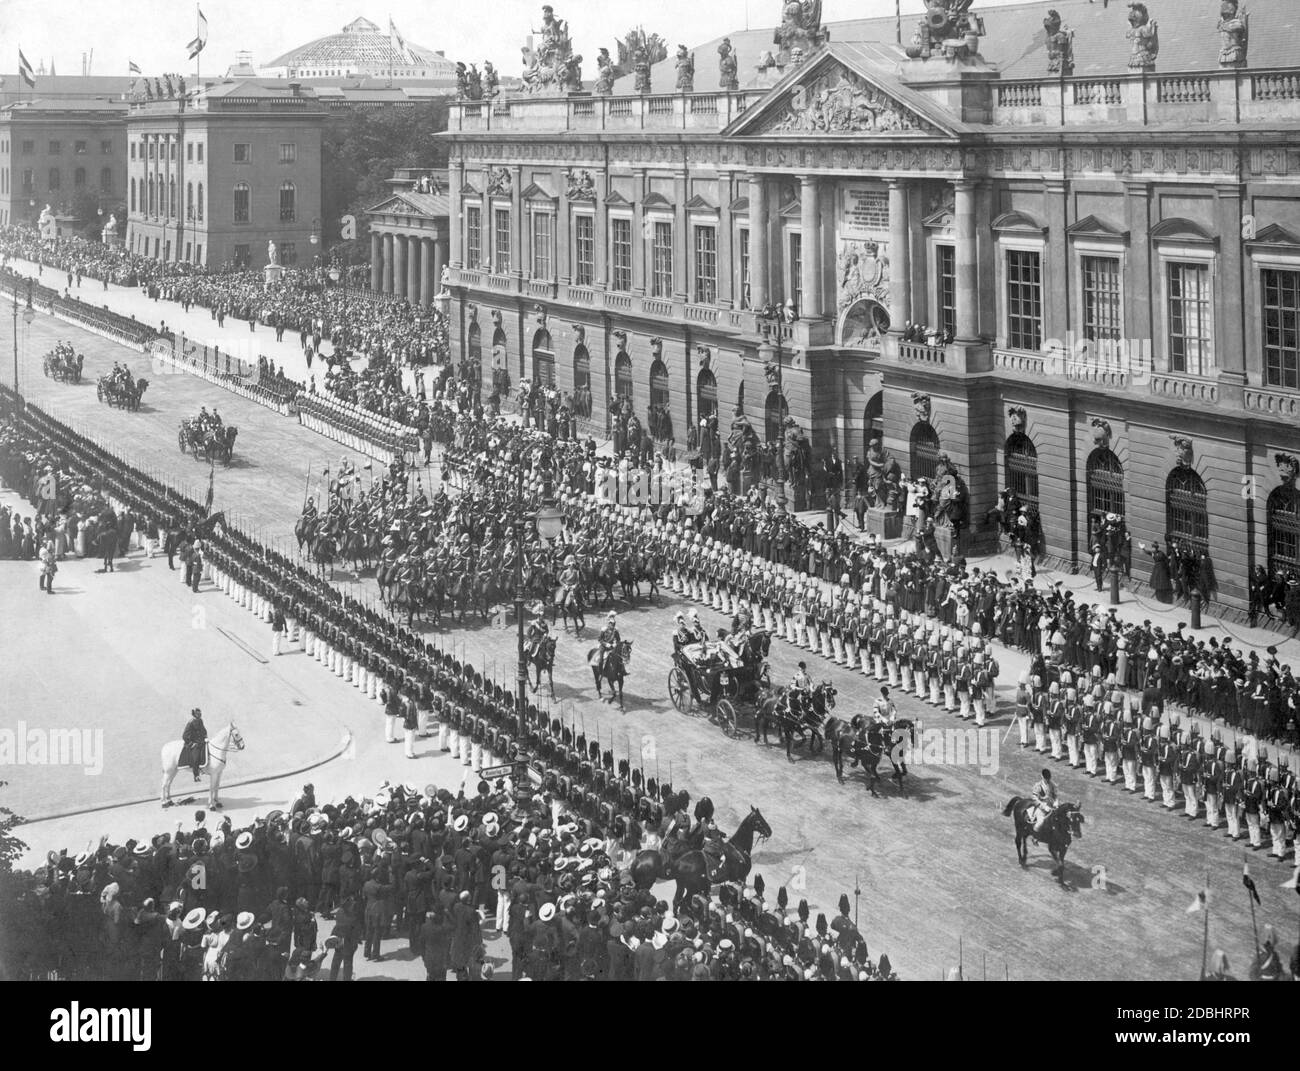 Tsar Nicholas II of Russia rides together with Kaiser Wilhelm II (first carriage in the picture) to the Berlin Palace during a parade on the street Unter den Linden in Berlin on May 22, 1913. On the right is the Zeughaus, left beside it the Neue Wache and on the left the Humboldt-University. The occasion of the Tsar's trip to Germany was the wedding of Ernest Augustus of Hanover with Victoria Louise of Prussia (daughter of the Emperor). Stock Photo